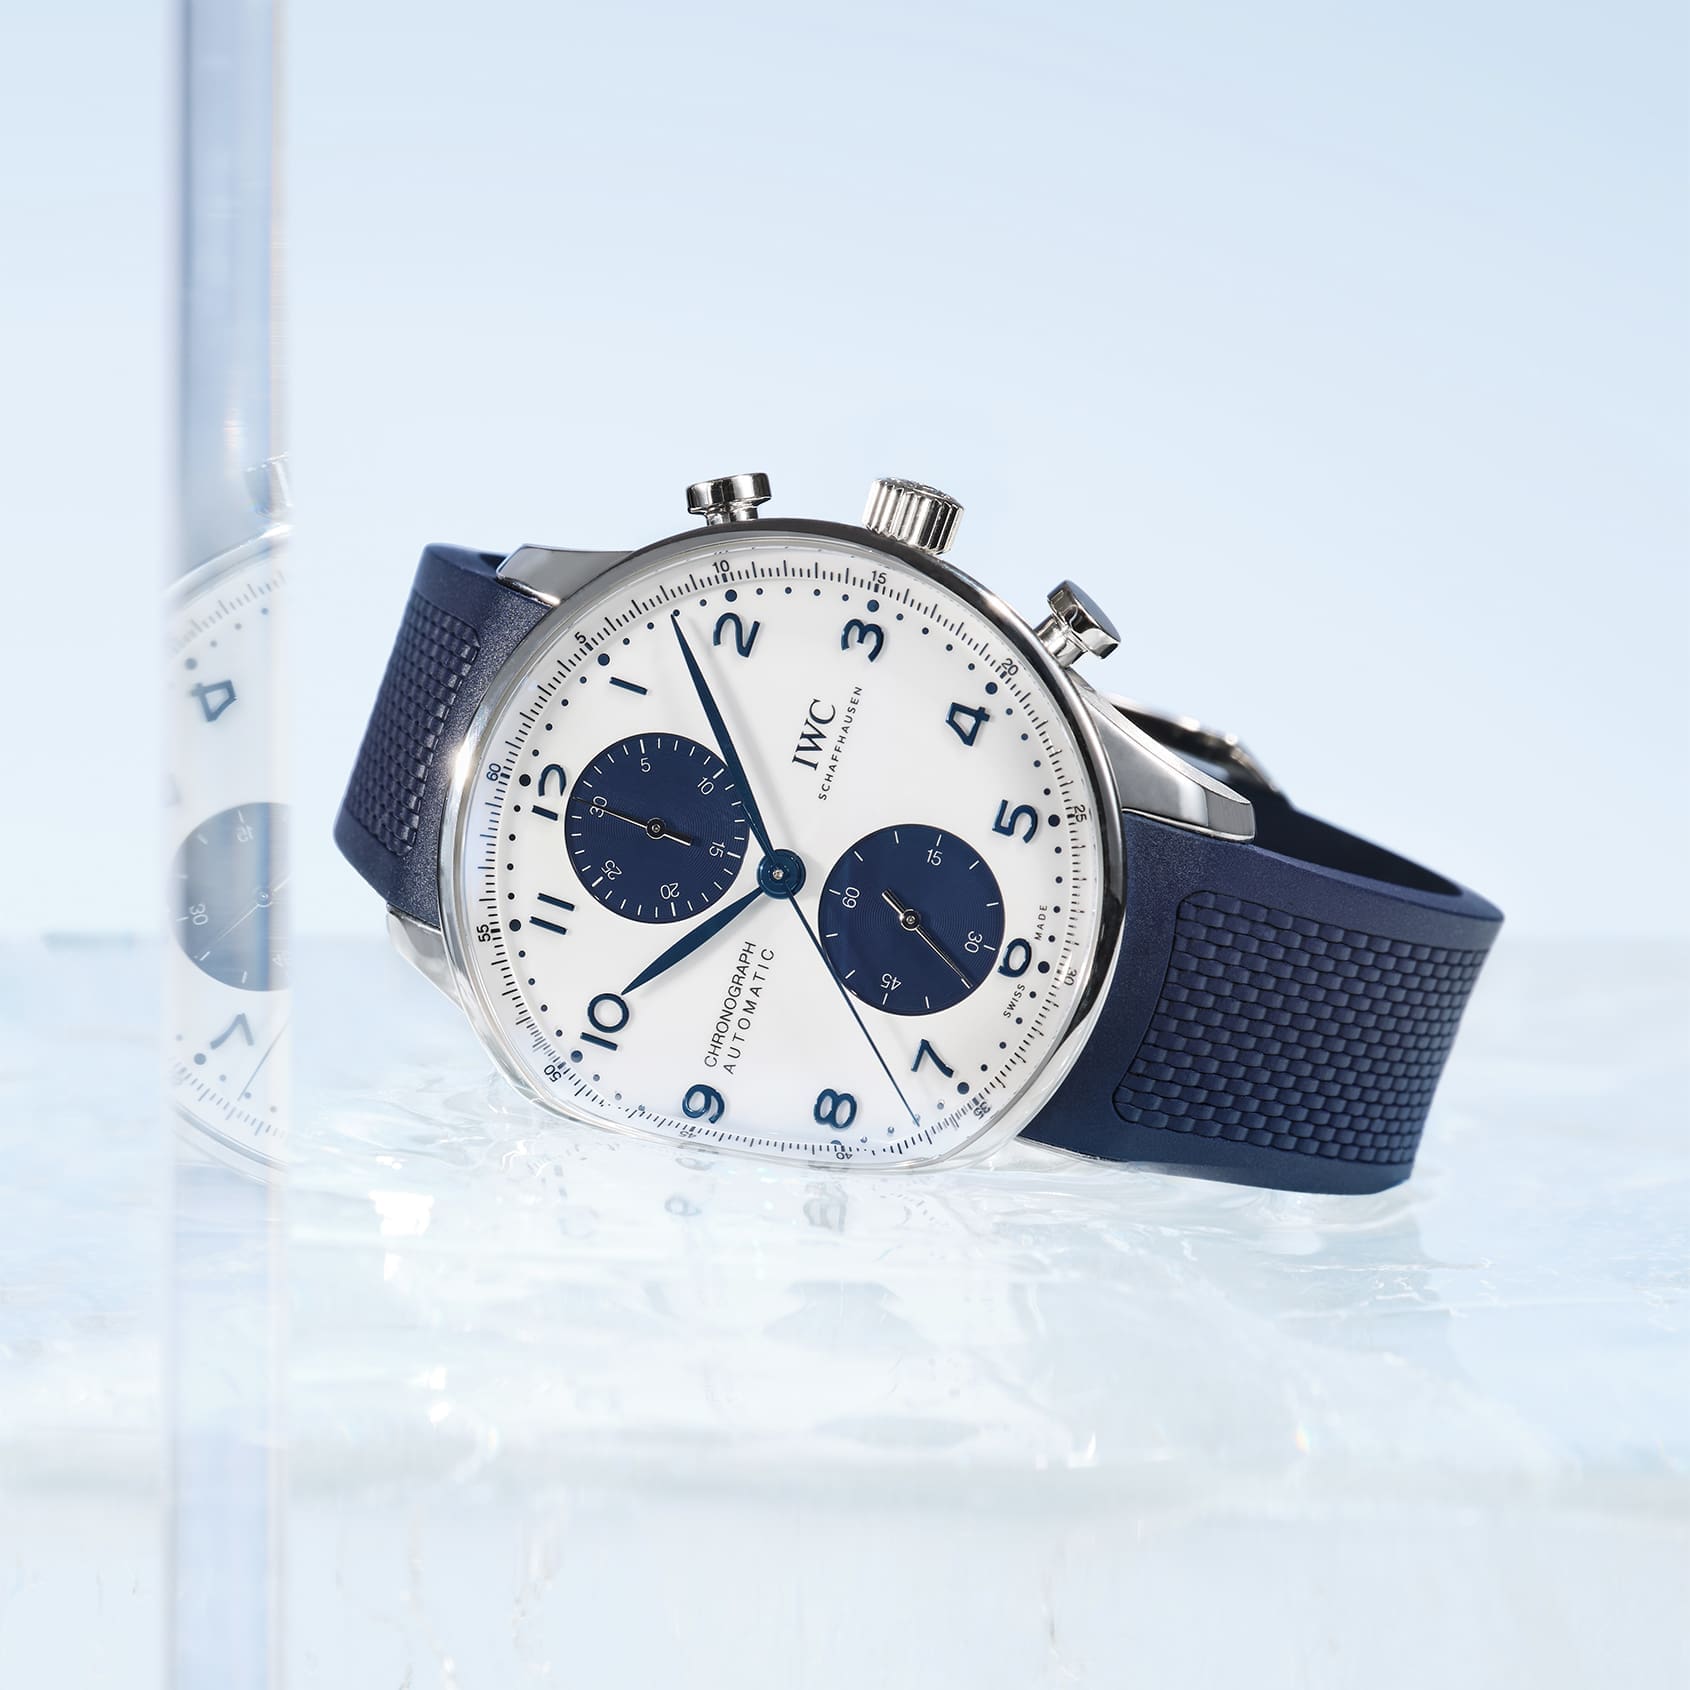 INTRODUCING: The IWC Portugeiser Automatic and Chronograph in white and blue